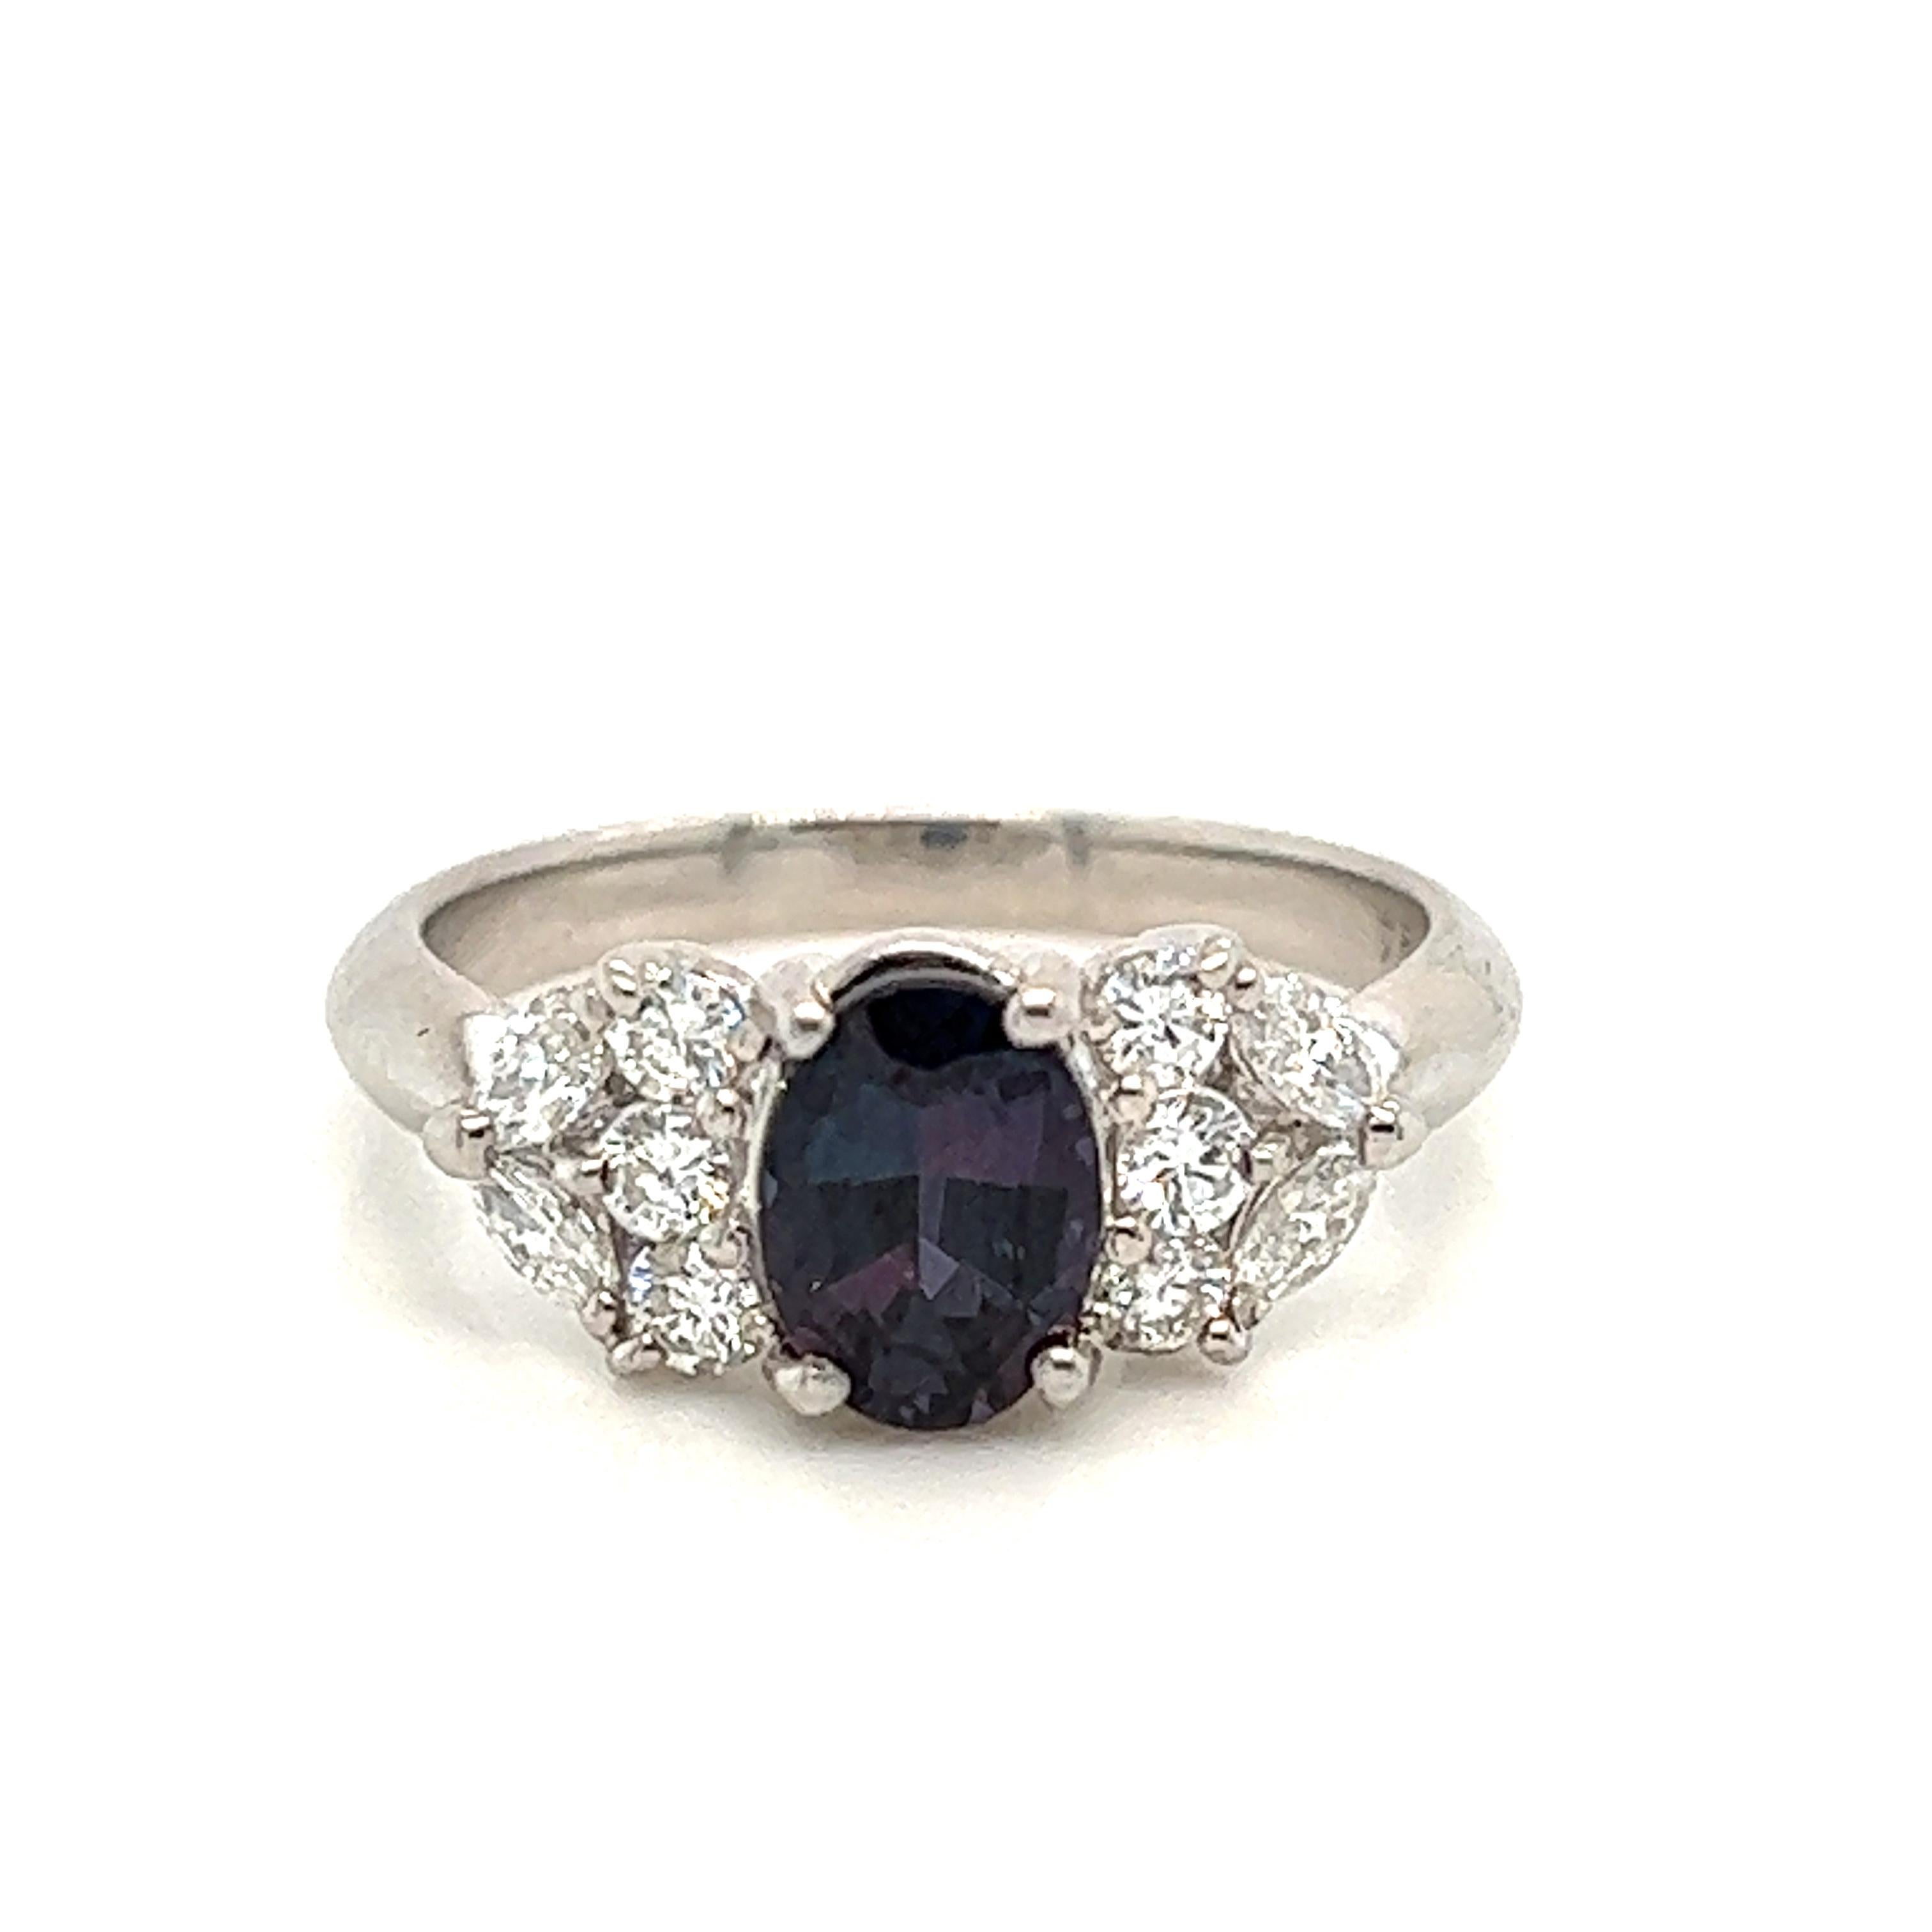 This is a gorgeous natural AAA quality oval Alexandrite surrounded by dainty diamonds that is set in a cocktail platinum setting. This ring features a natural 1.24 carat oval alexandrite that is certified by the Gemological Institute of America